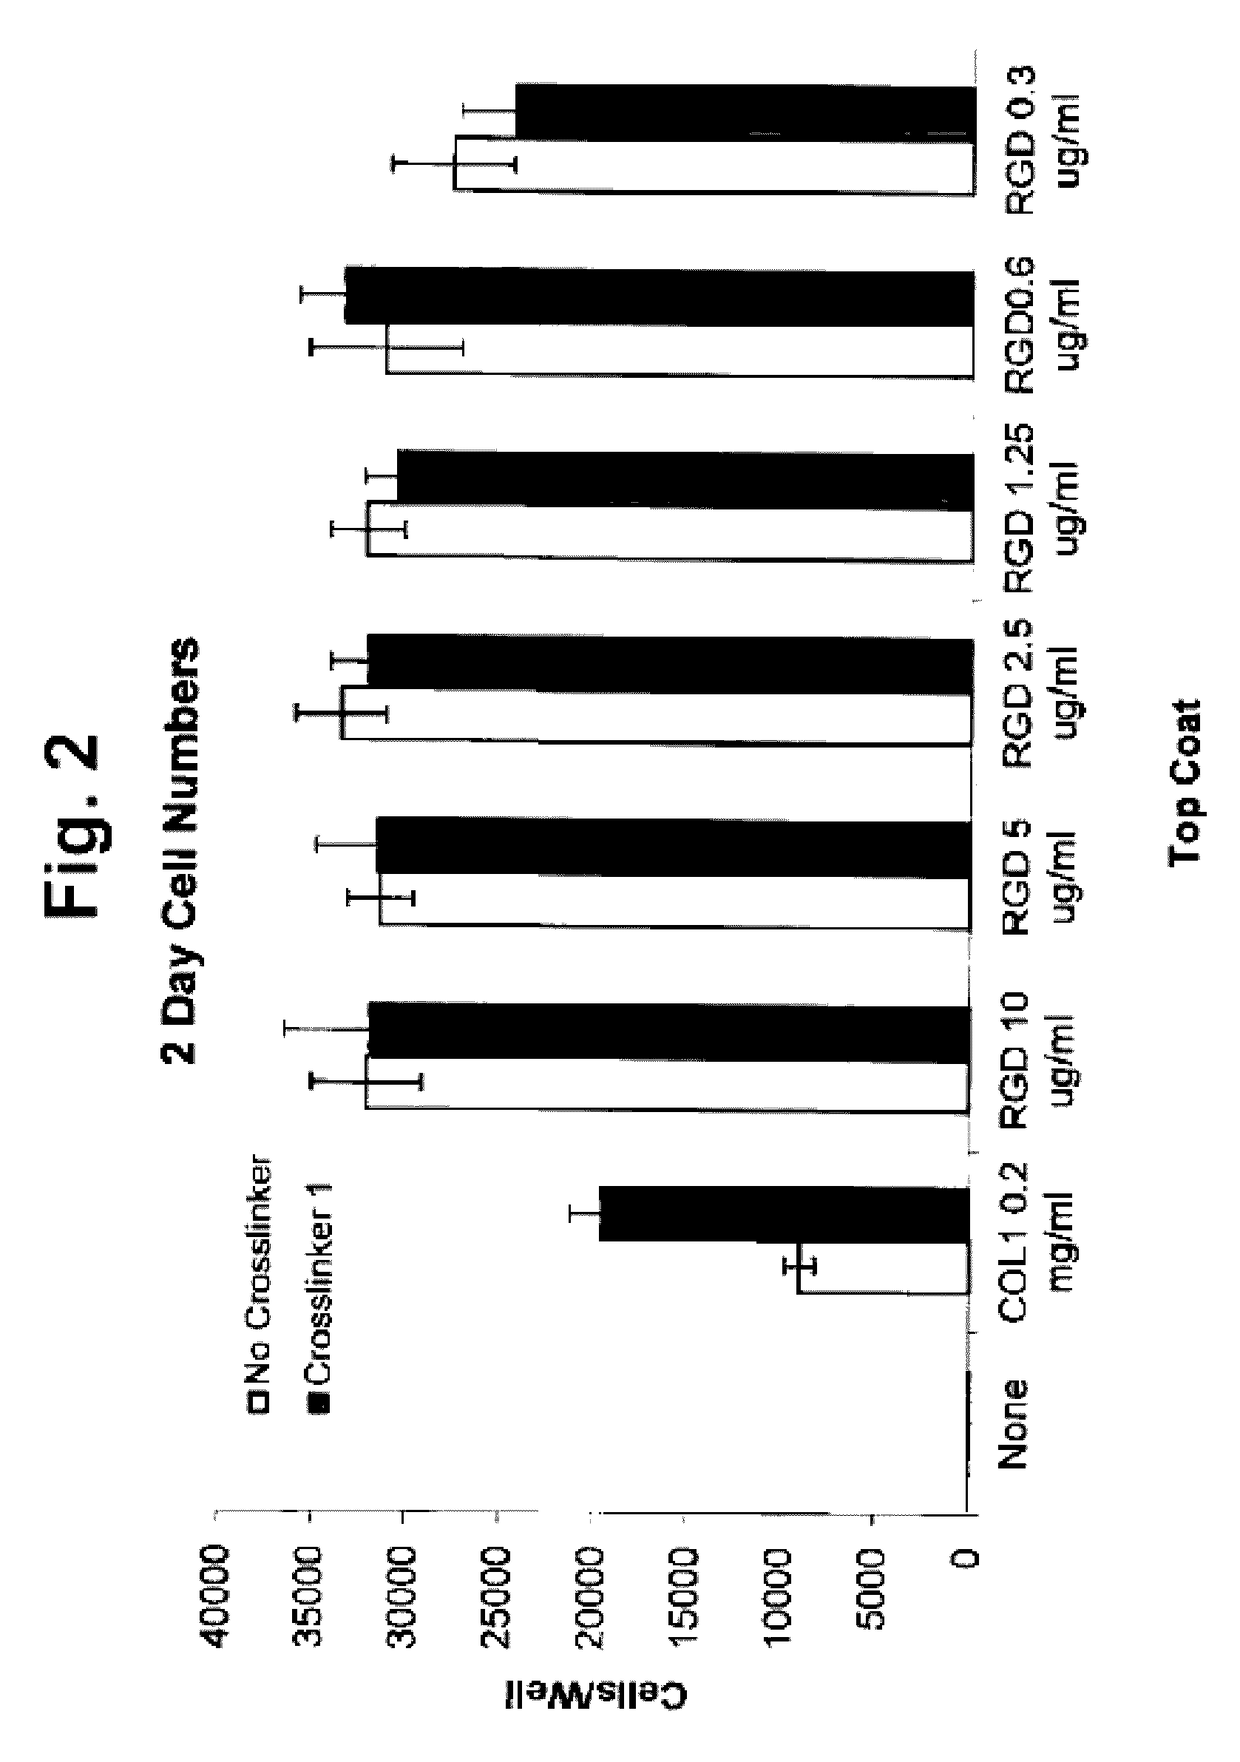 Cell attachment coatings and methods using phosphorous-containing photoreagent